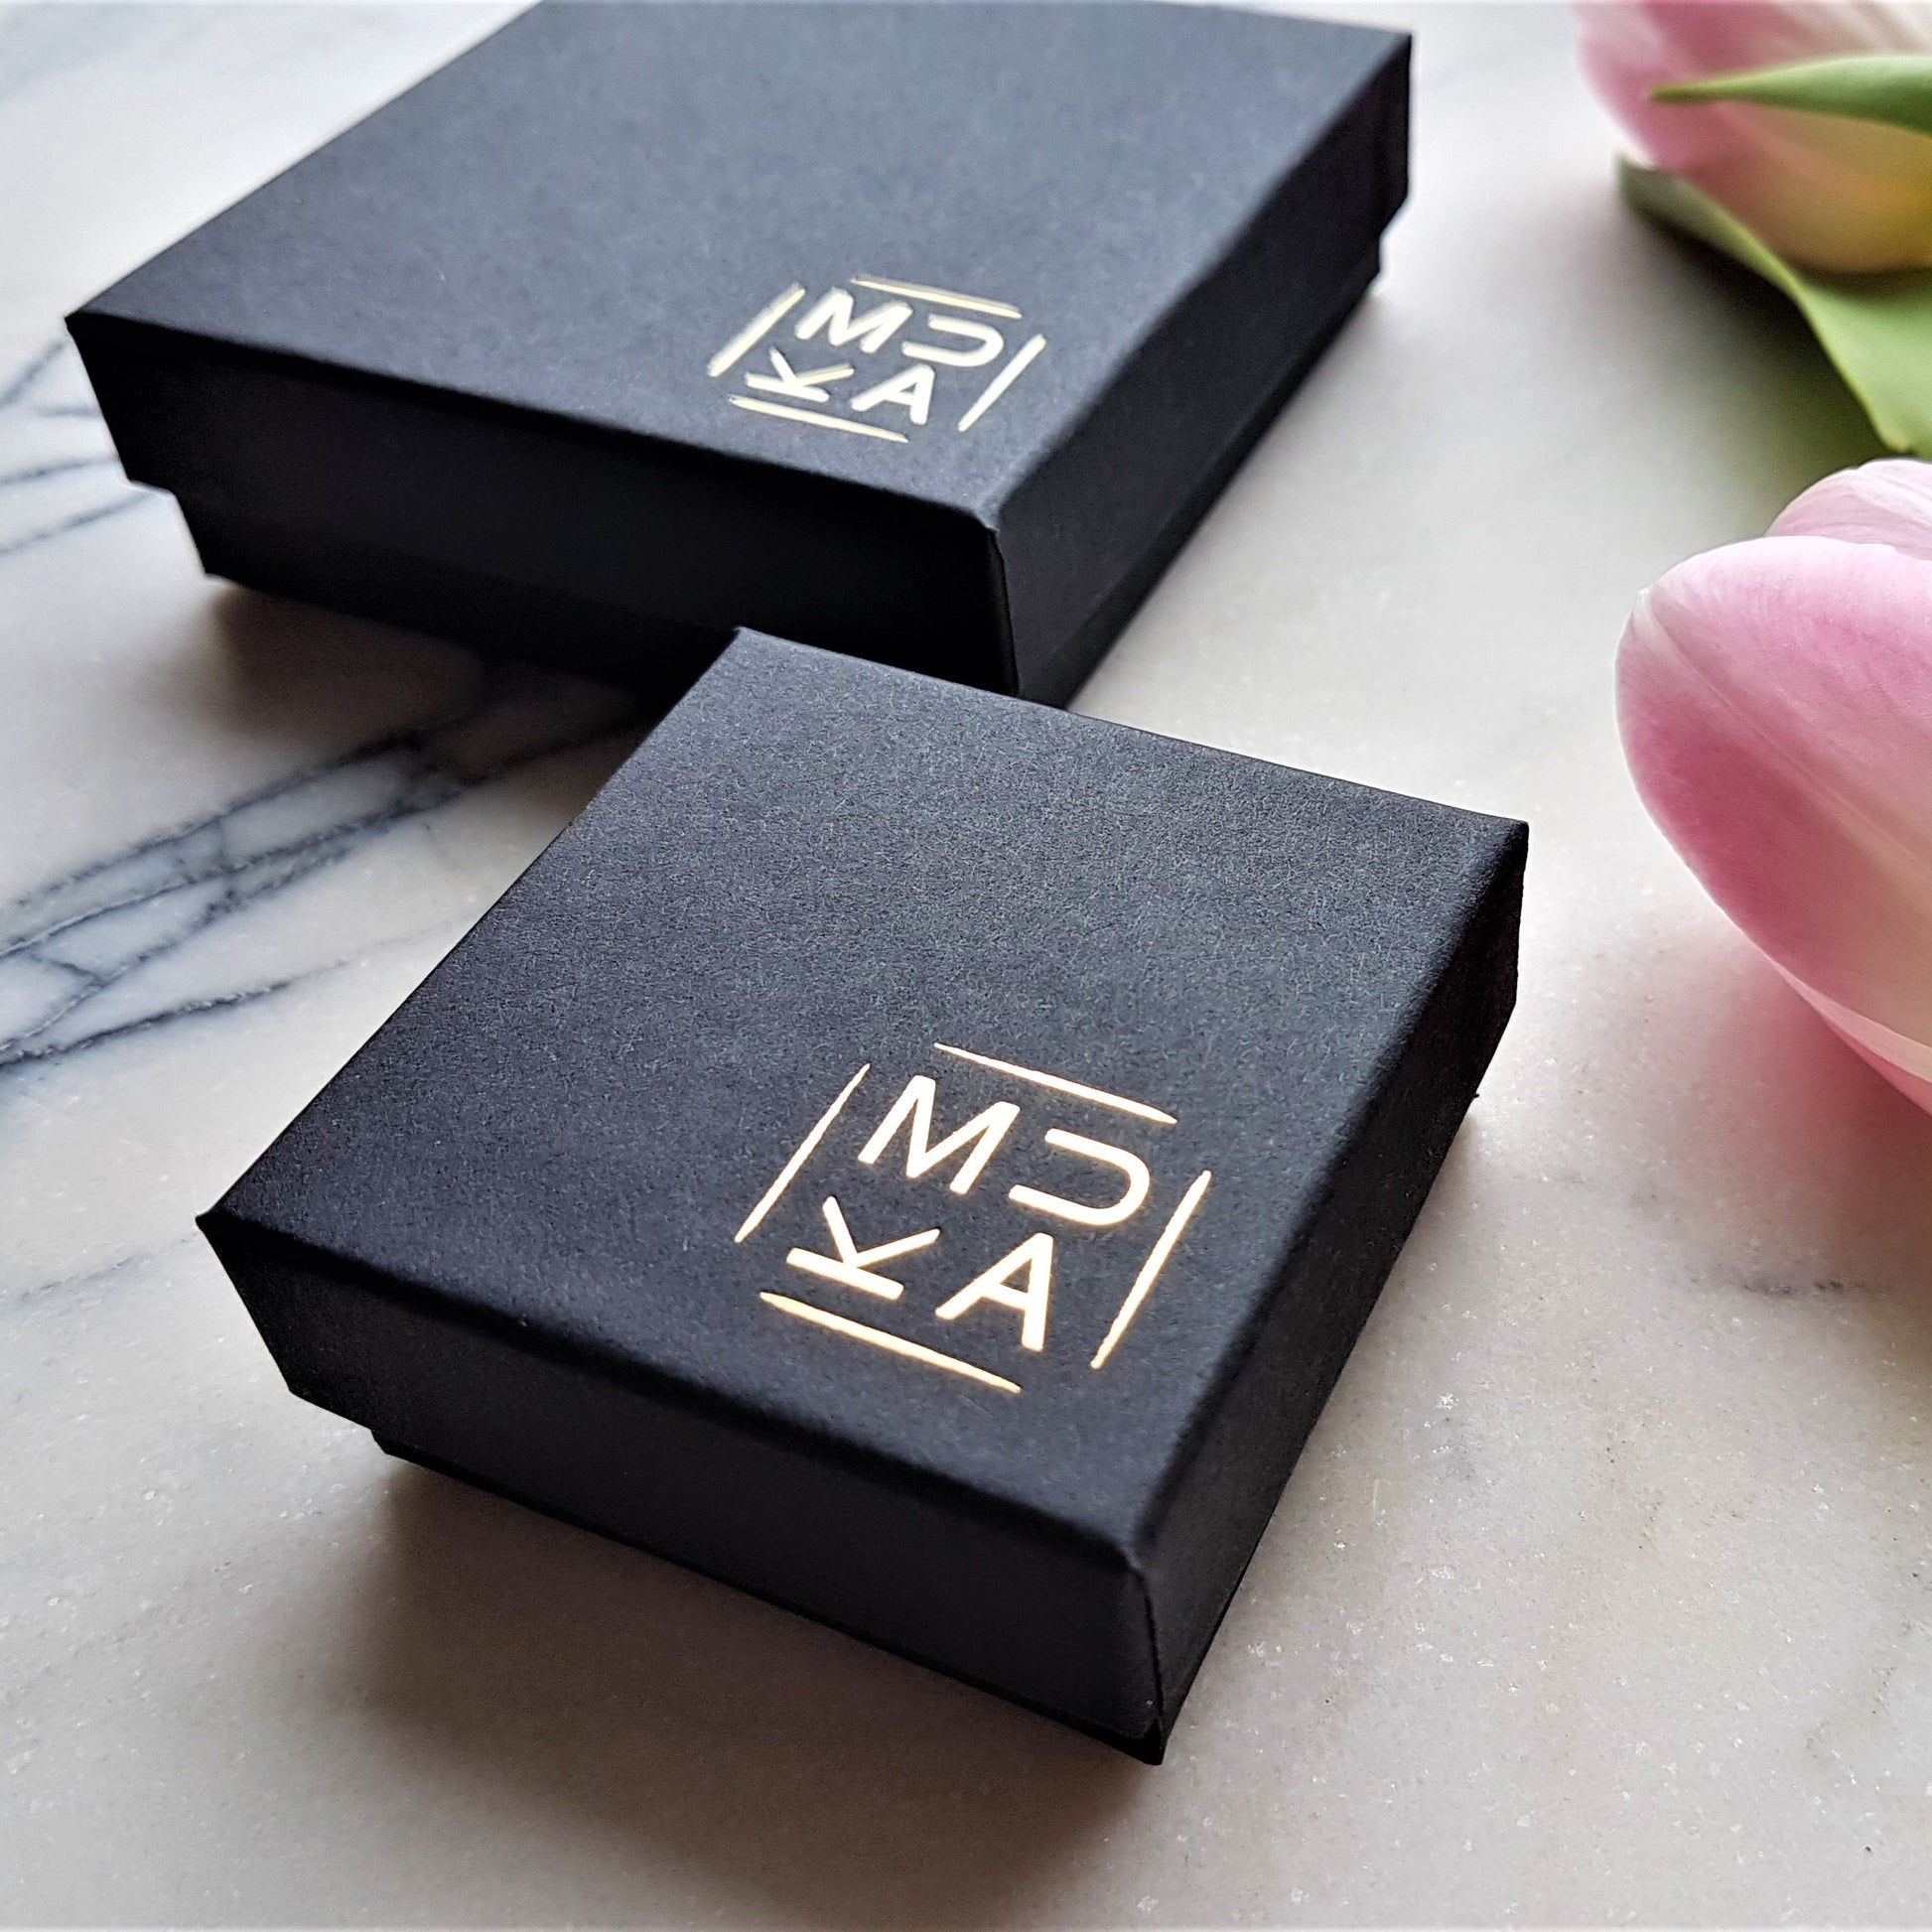 MUKA branded jewellery boxes